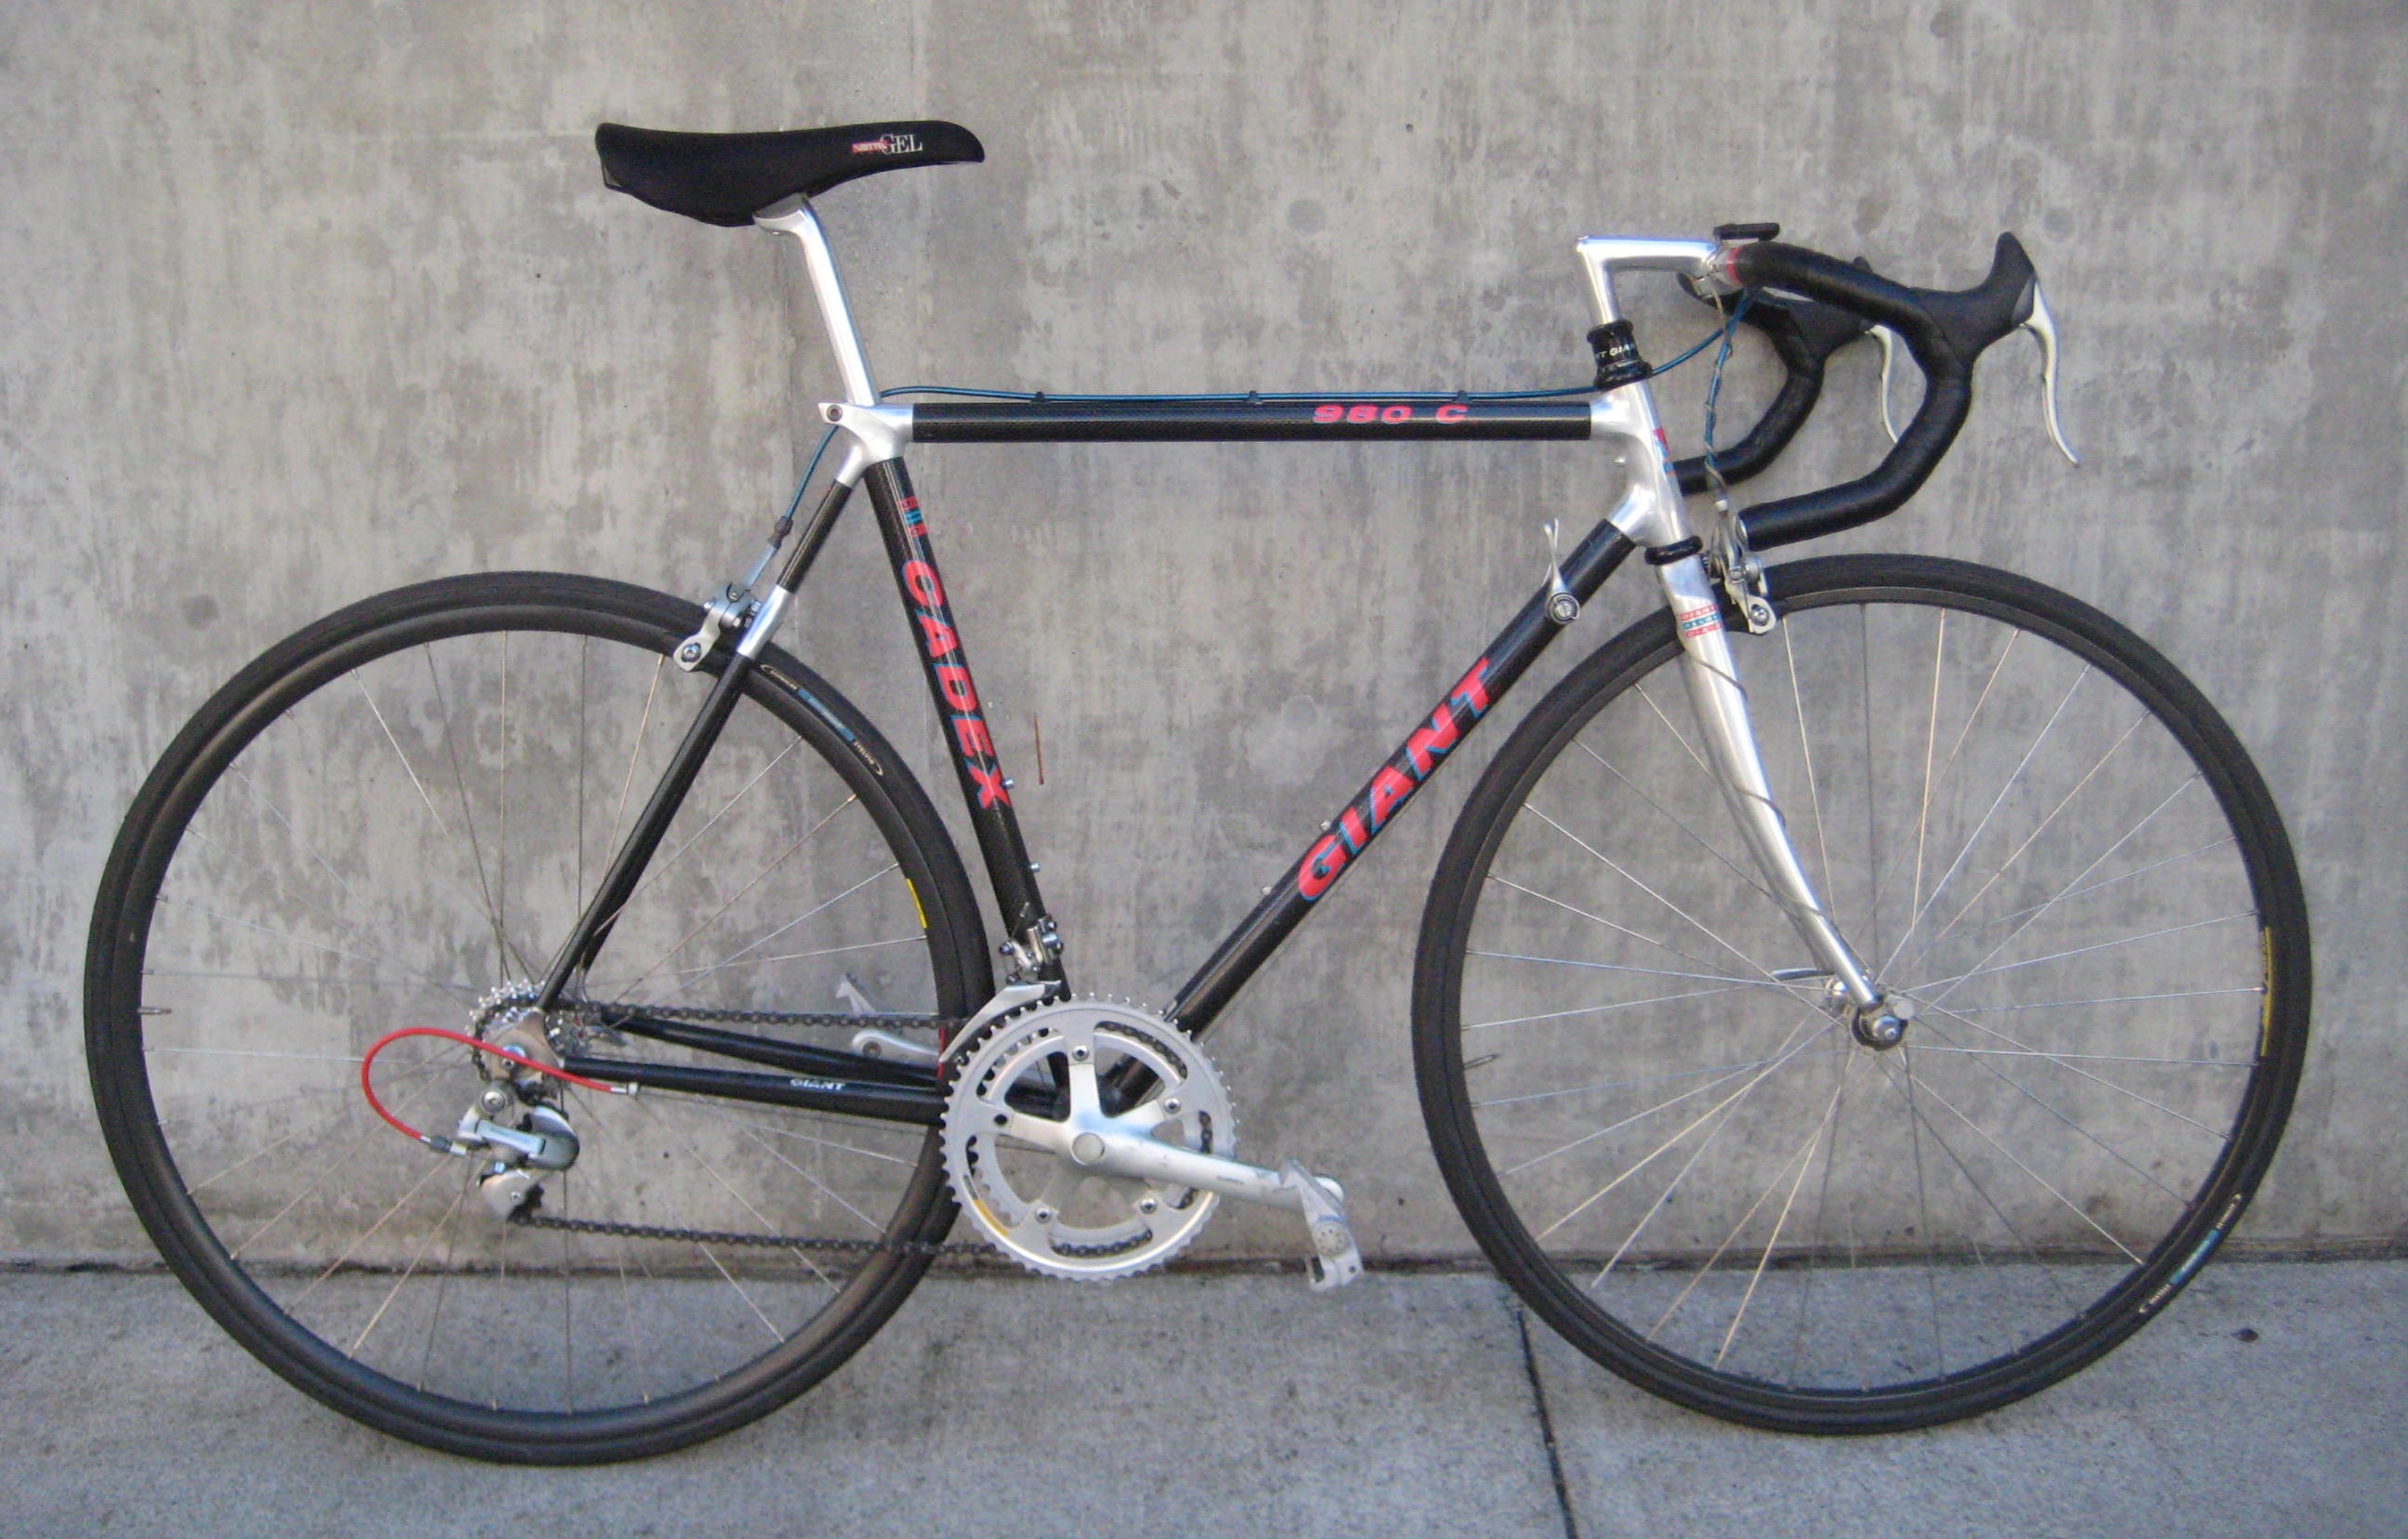 1989 Giant Cadex 980 at Classic Cycle 